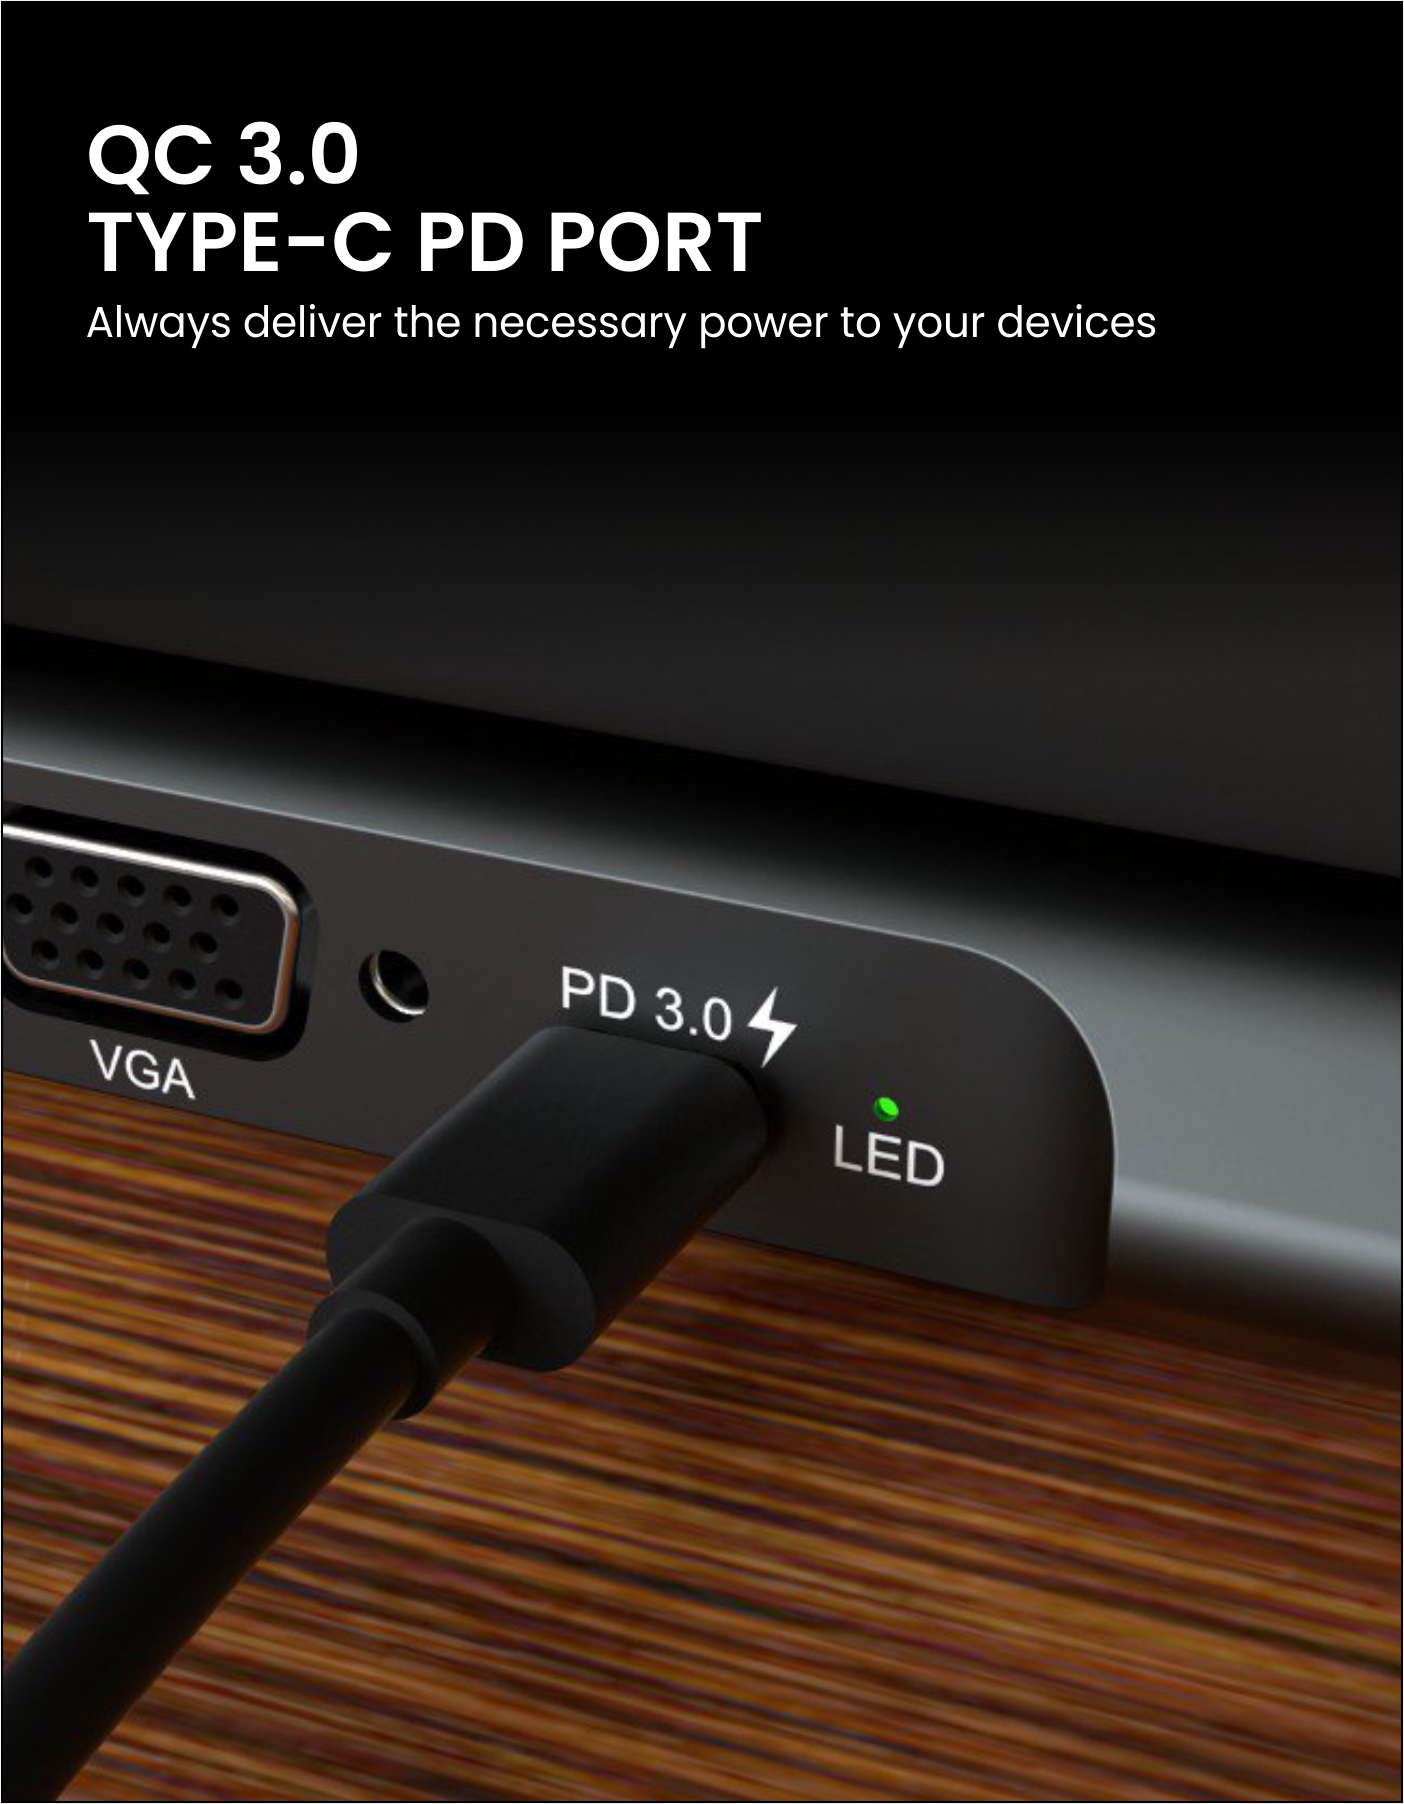 Portronics Mport 13C USB Multiport hub 13-in-1 docking station with USB, HDMI, Ethernet, & VGA ports, and Type-C PD charging slot along with TF & SD card slots